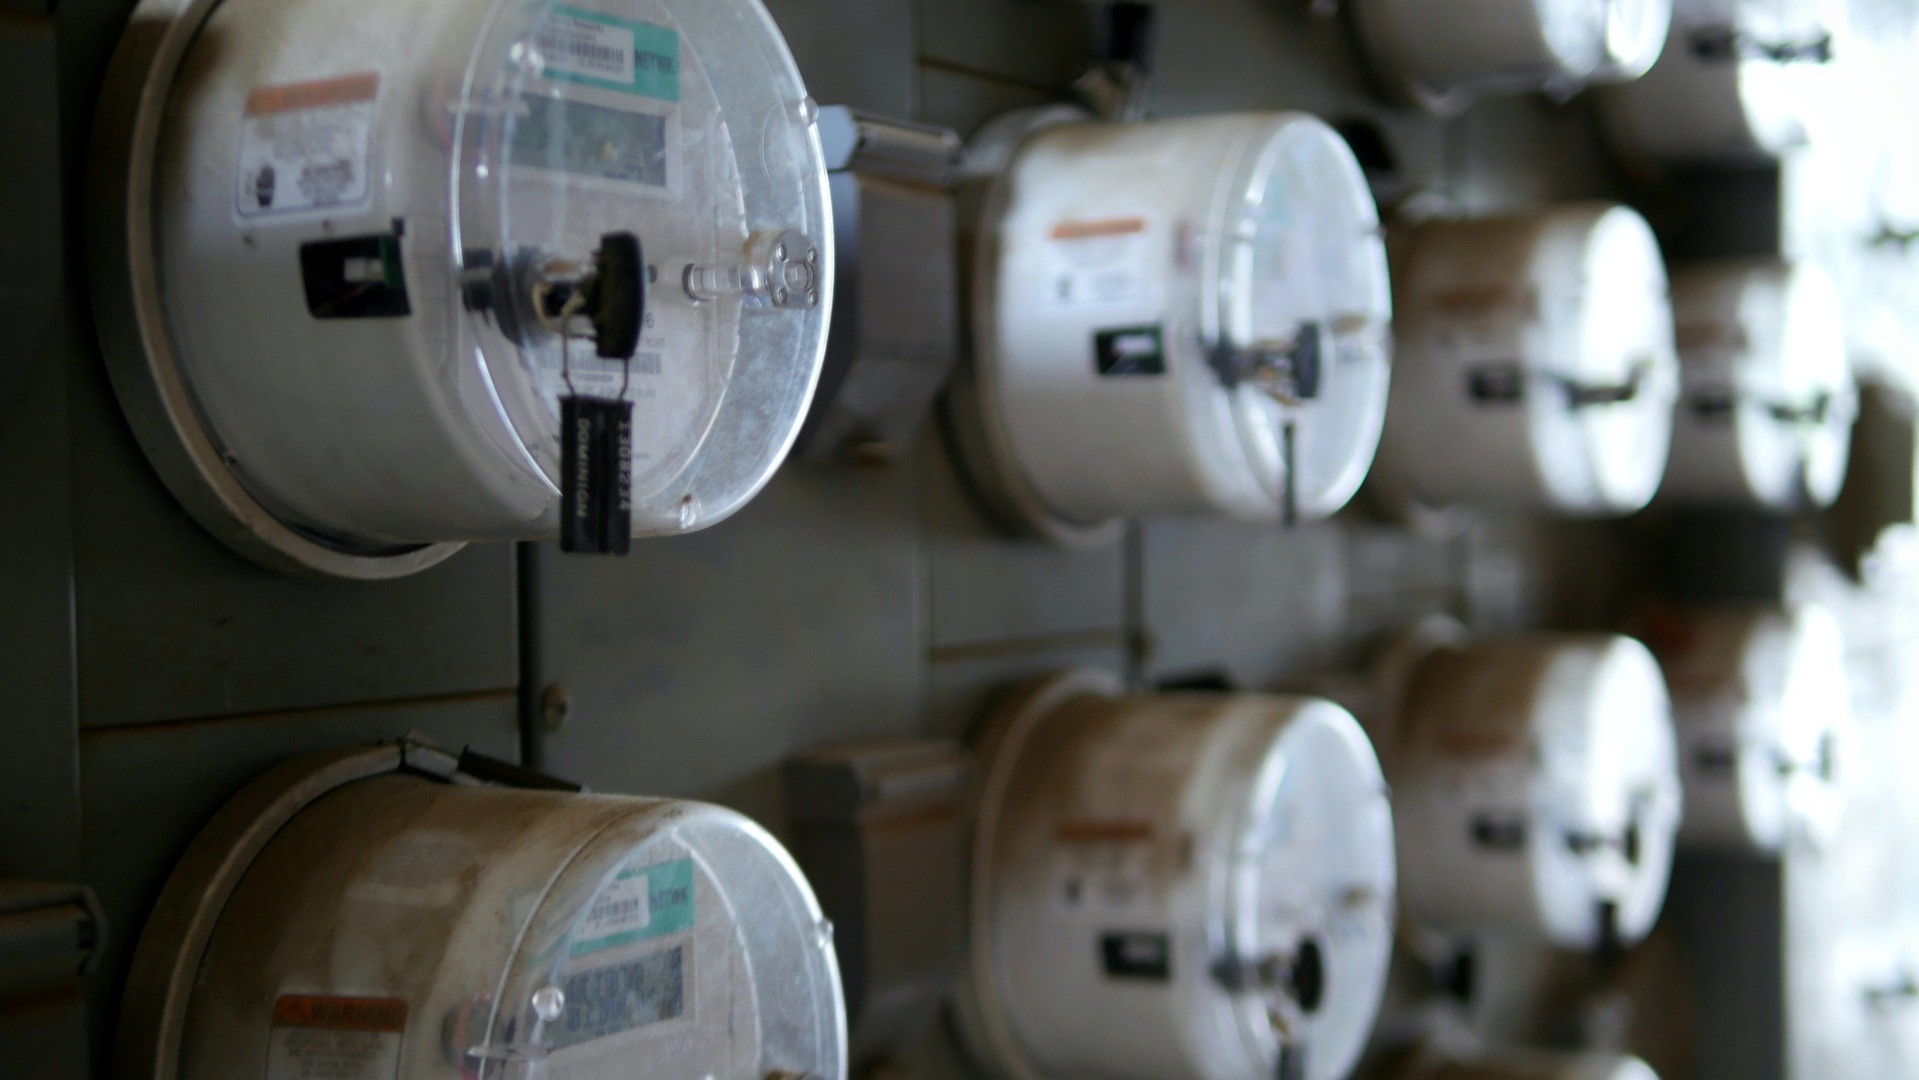 Majority of Hungarians Do Not See Significant Increase in Utility Costs